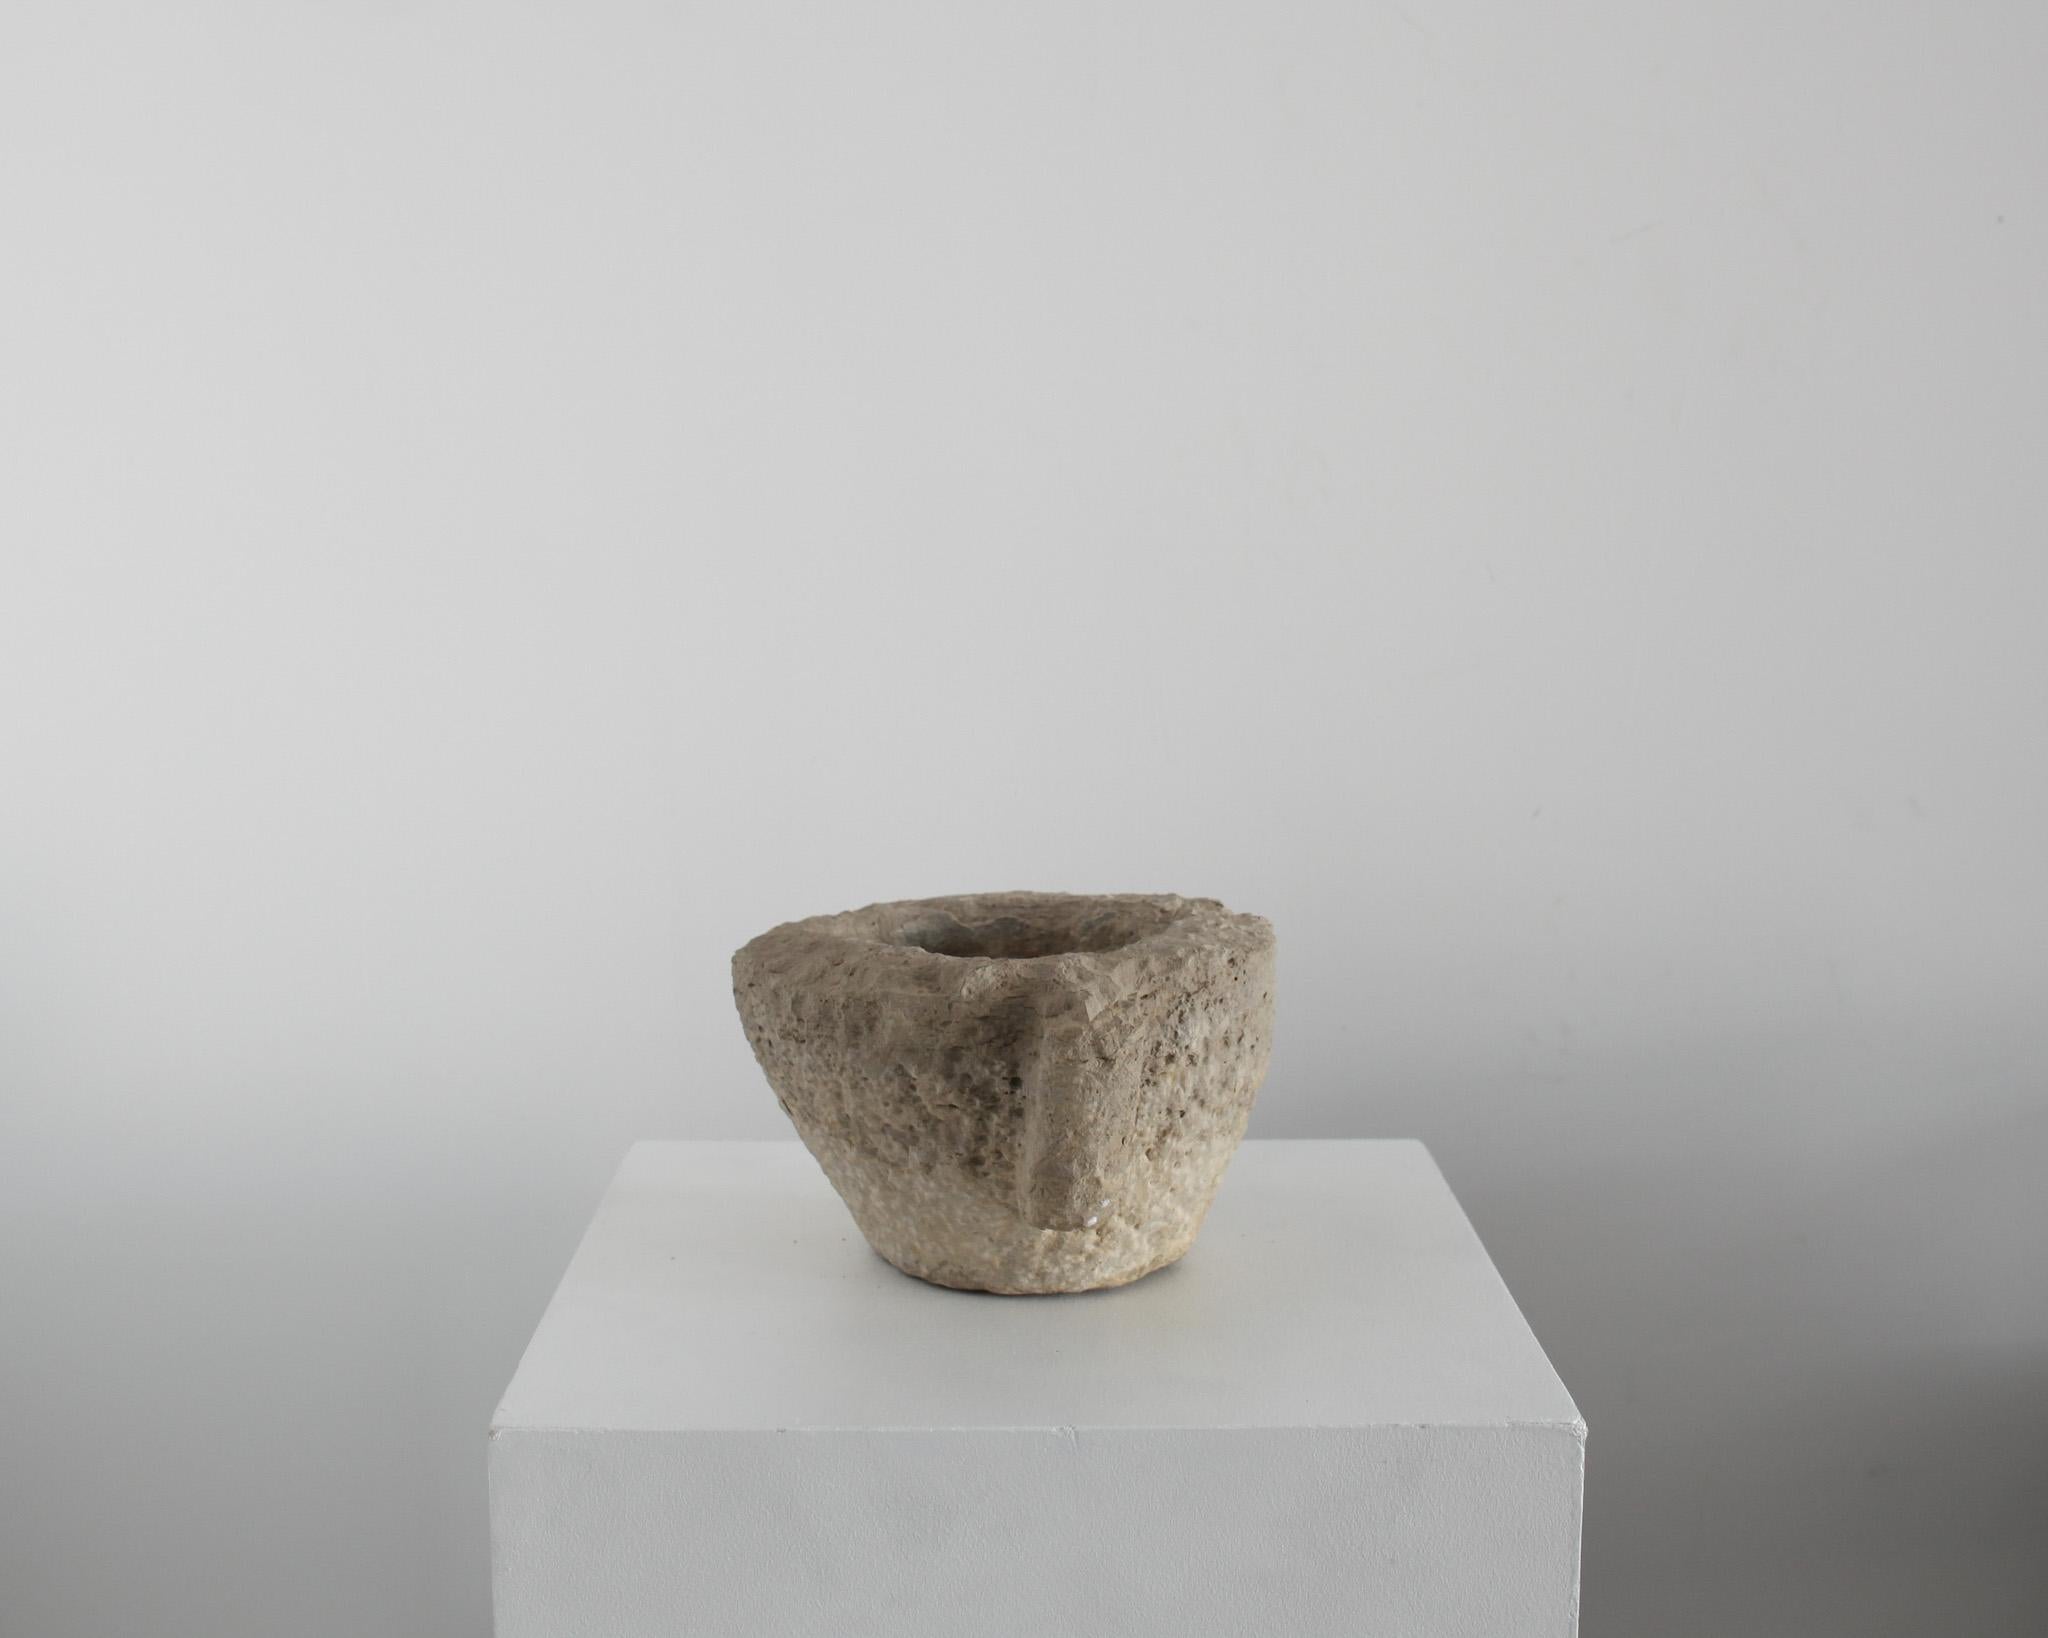 A Very Early Primitive Wabi Sabi 17Th C. Spanish Stone Mortar In Good Condition For Sale In London, GB